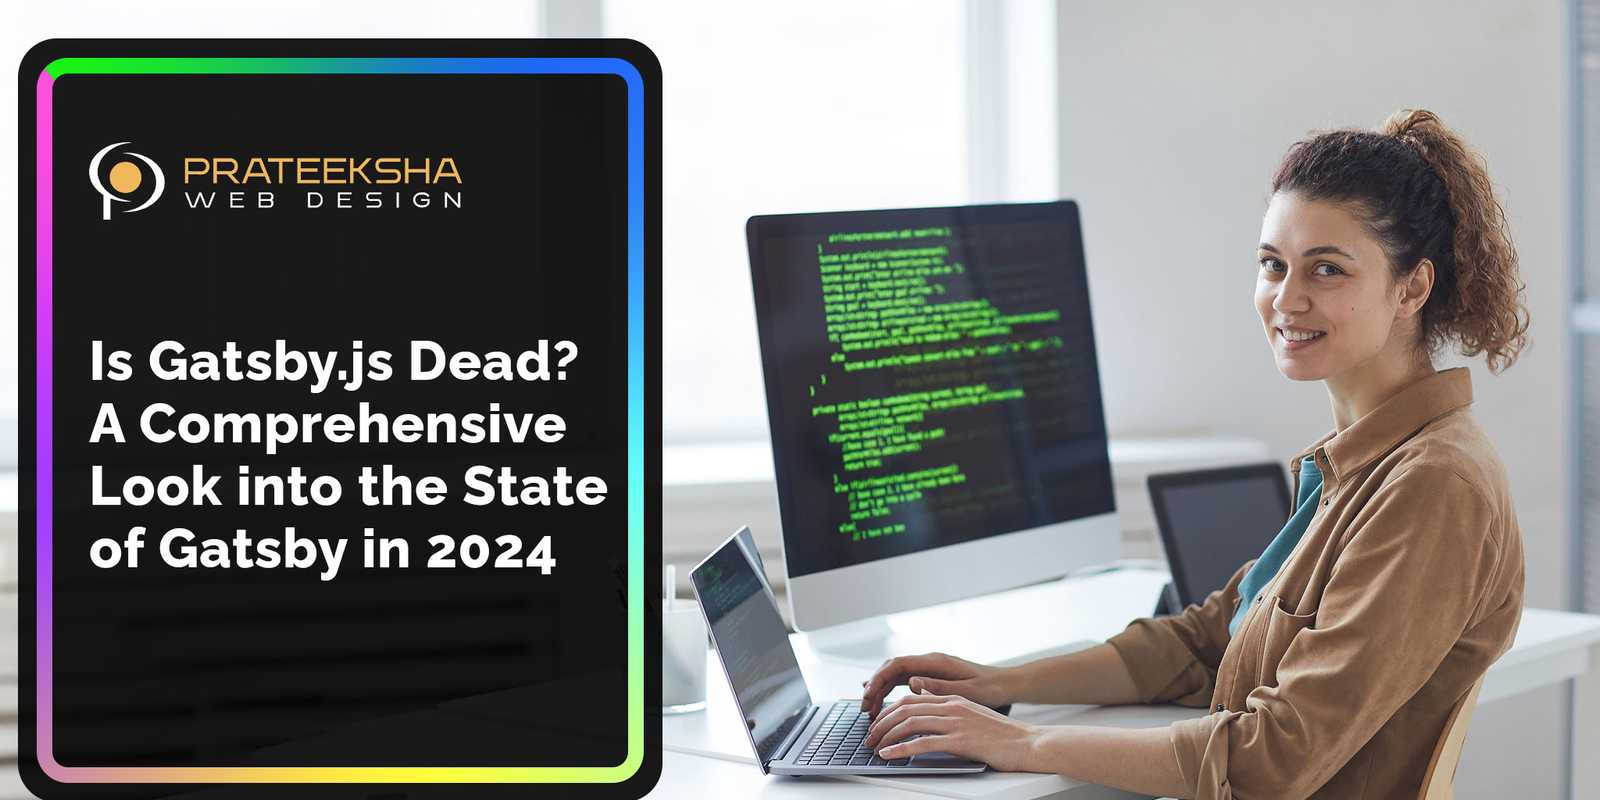 Is Gatsby.js Dead? A Comprehensive Look into the State of Gatsby in 2024